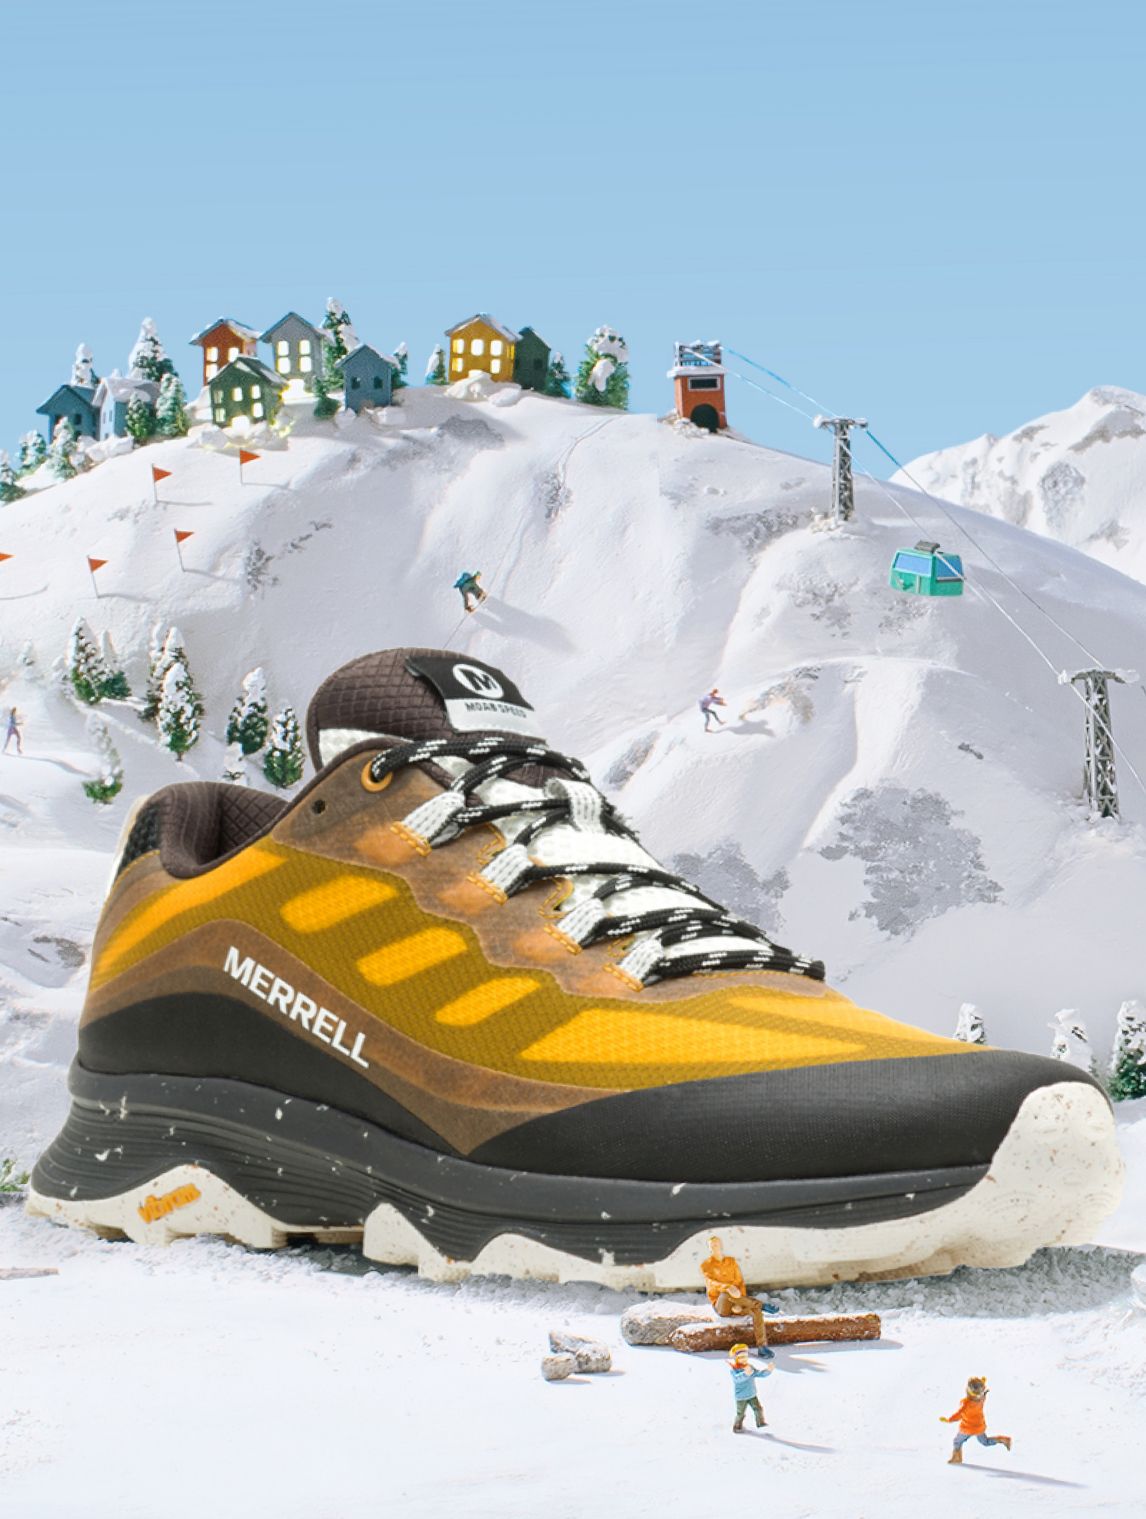 A yellow and black Merrell shoe on a snowy mountain.